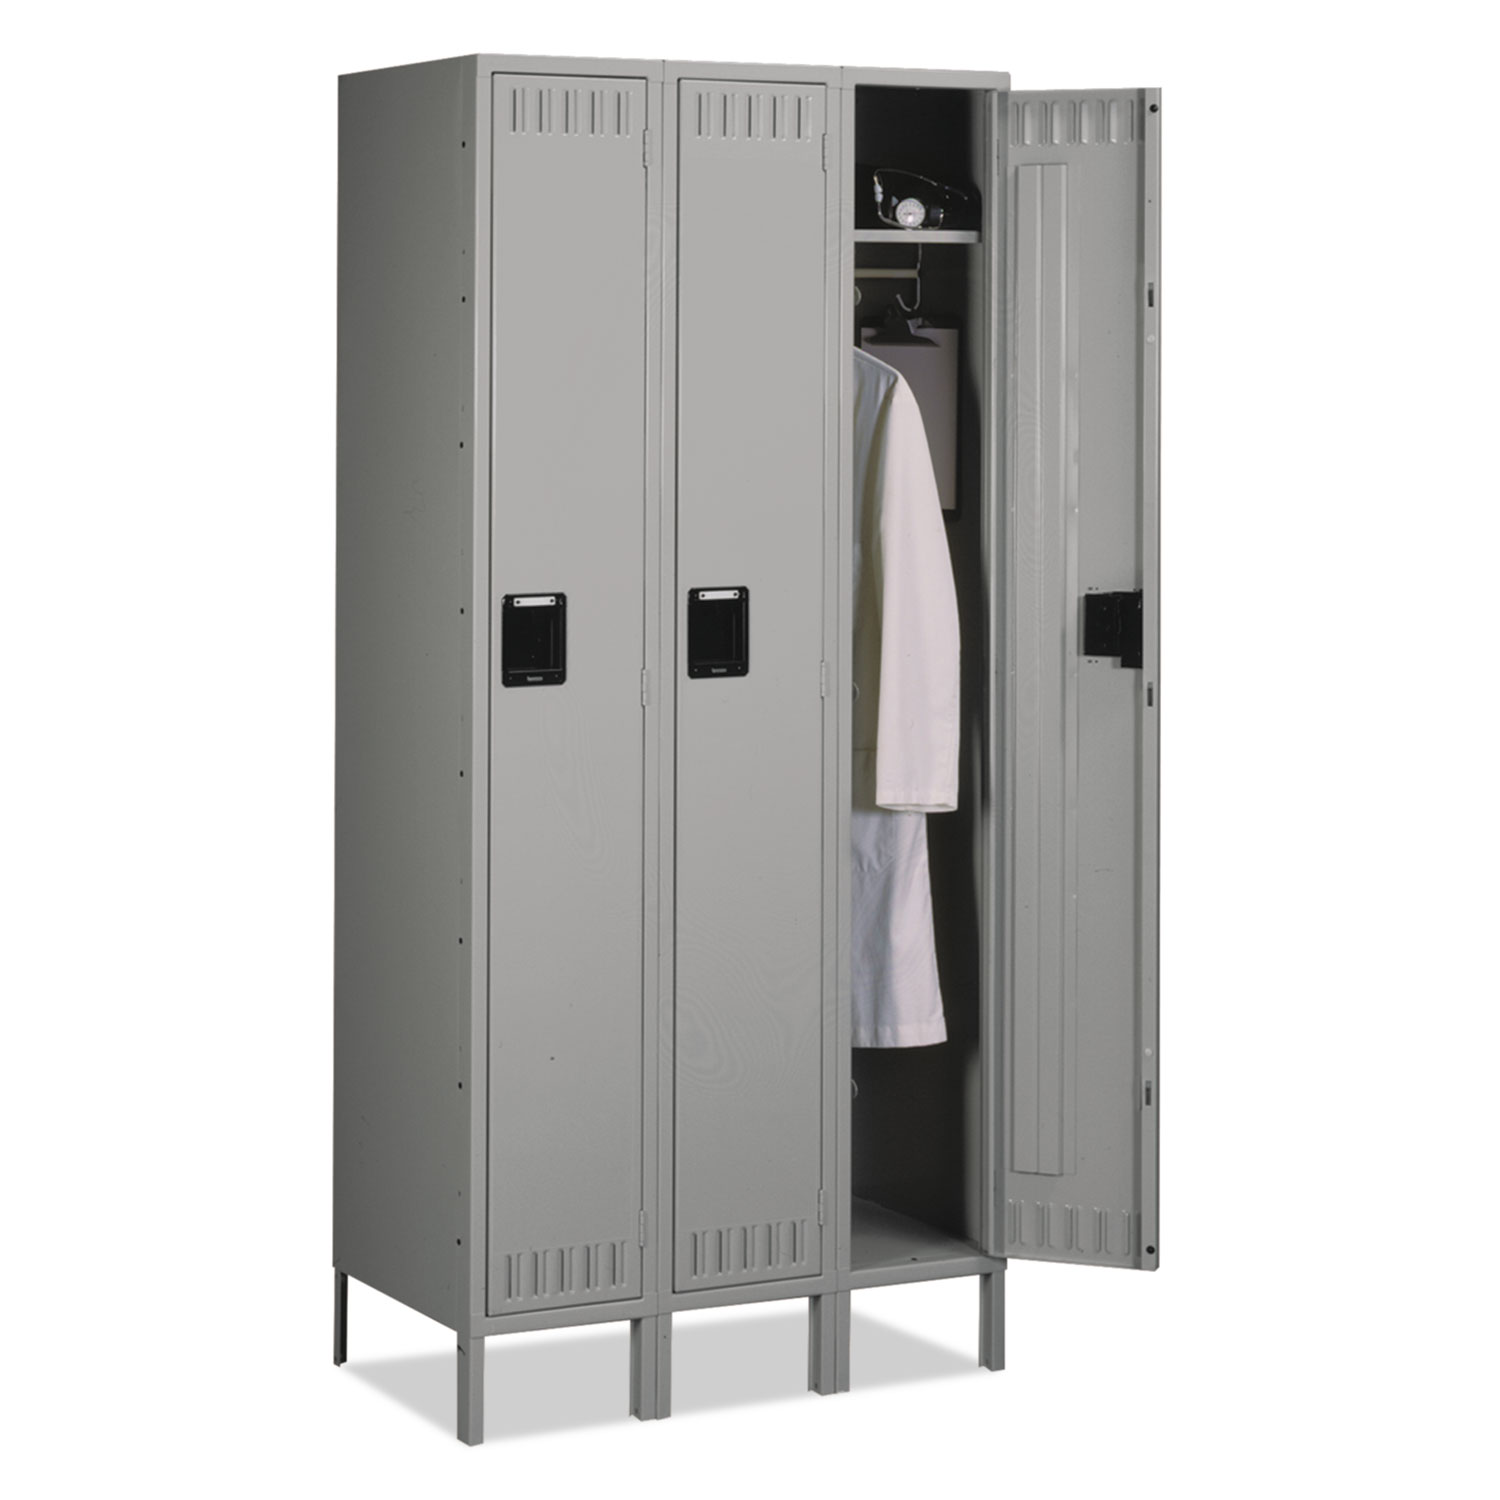 Single-Tier Locker with Legs, Three Lockers with Hat Shelves and Coat Rods,  36w x 18d x 78h, Medium Gray - Golden Isles Office Equipment